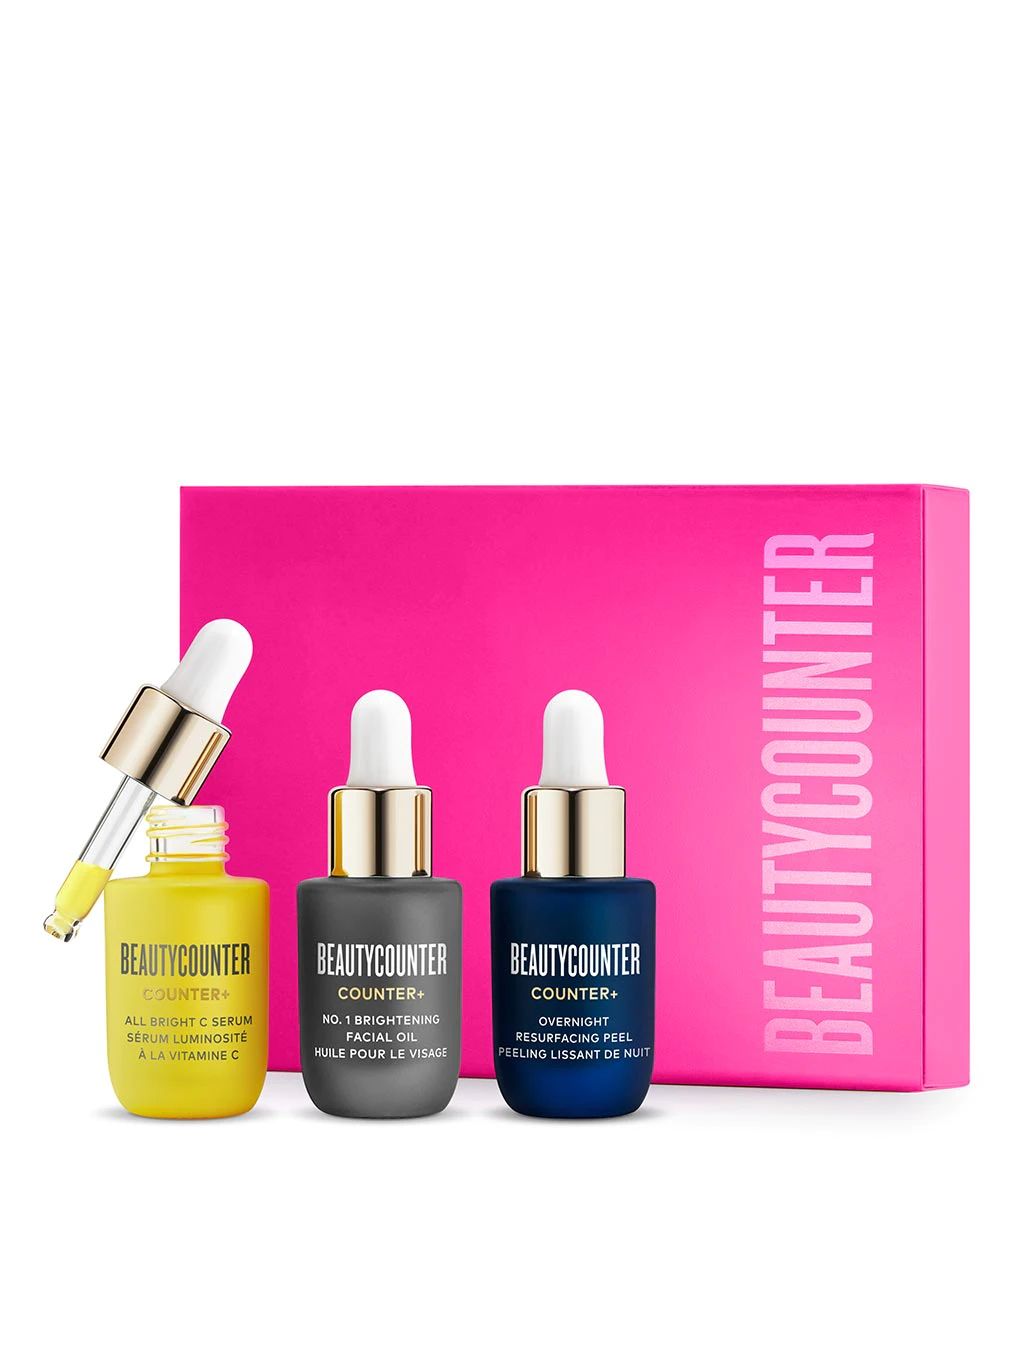 Limited EditionNew | Beautycounter.com